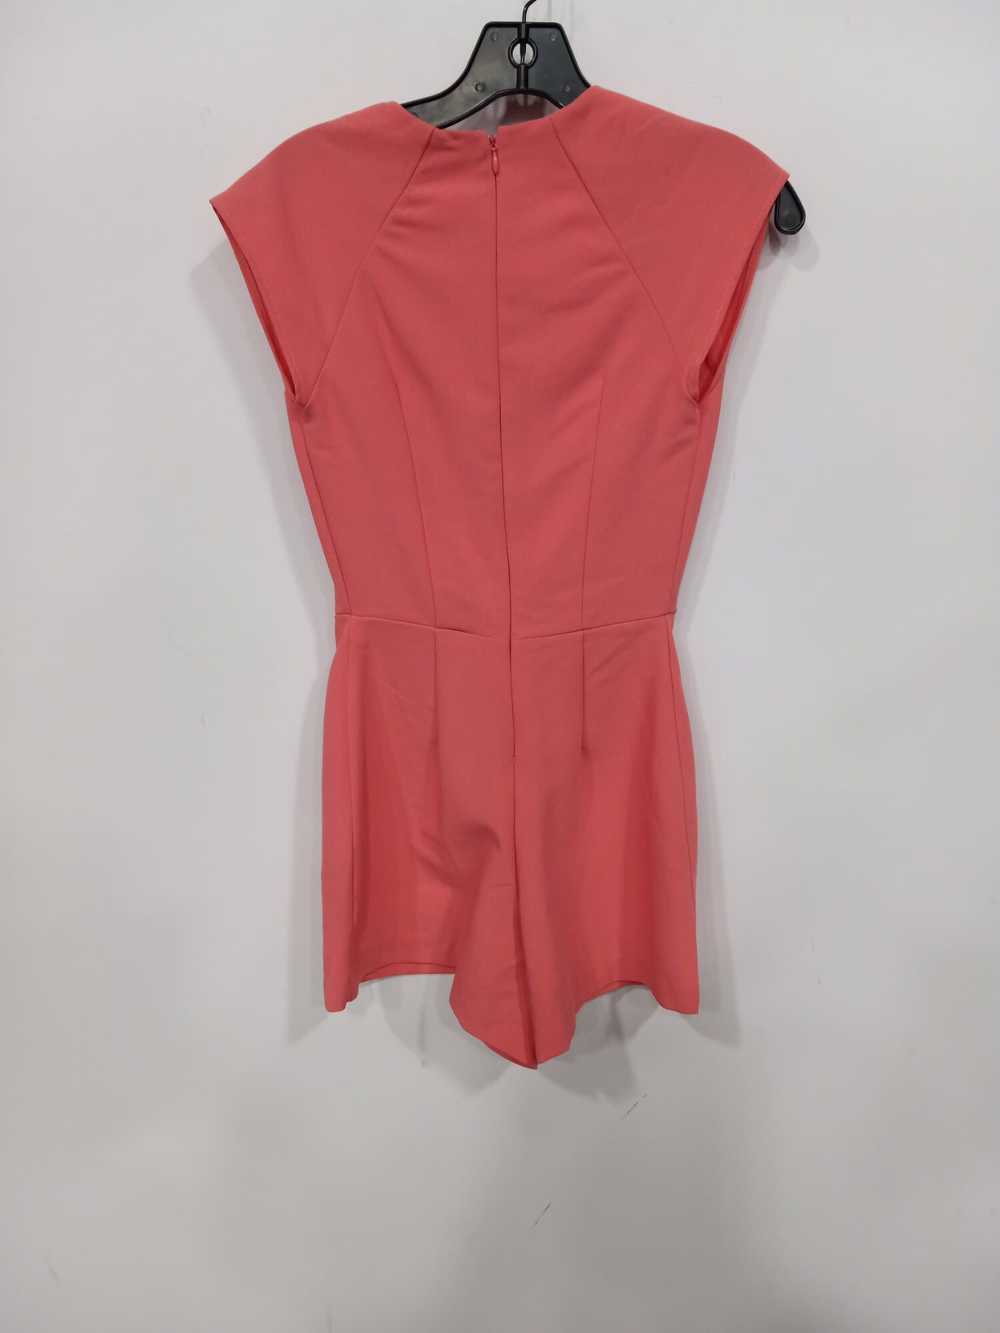 Guess Women's Pink Summer Romper Size 2 NWT - image 2